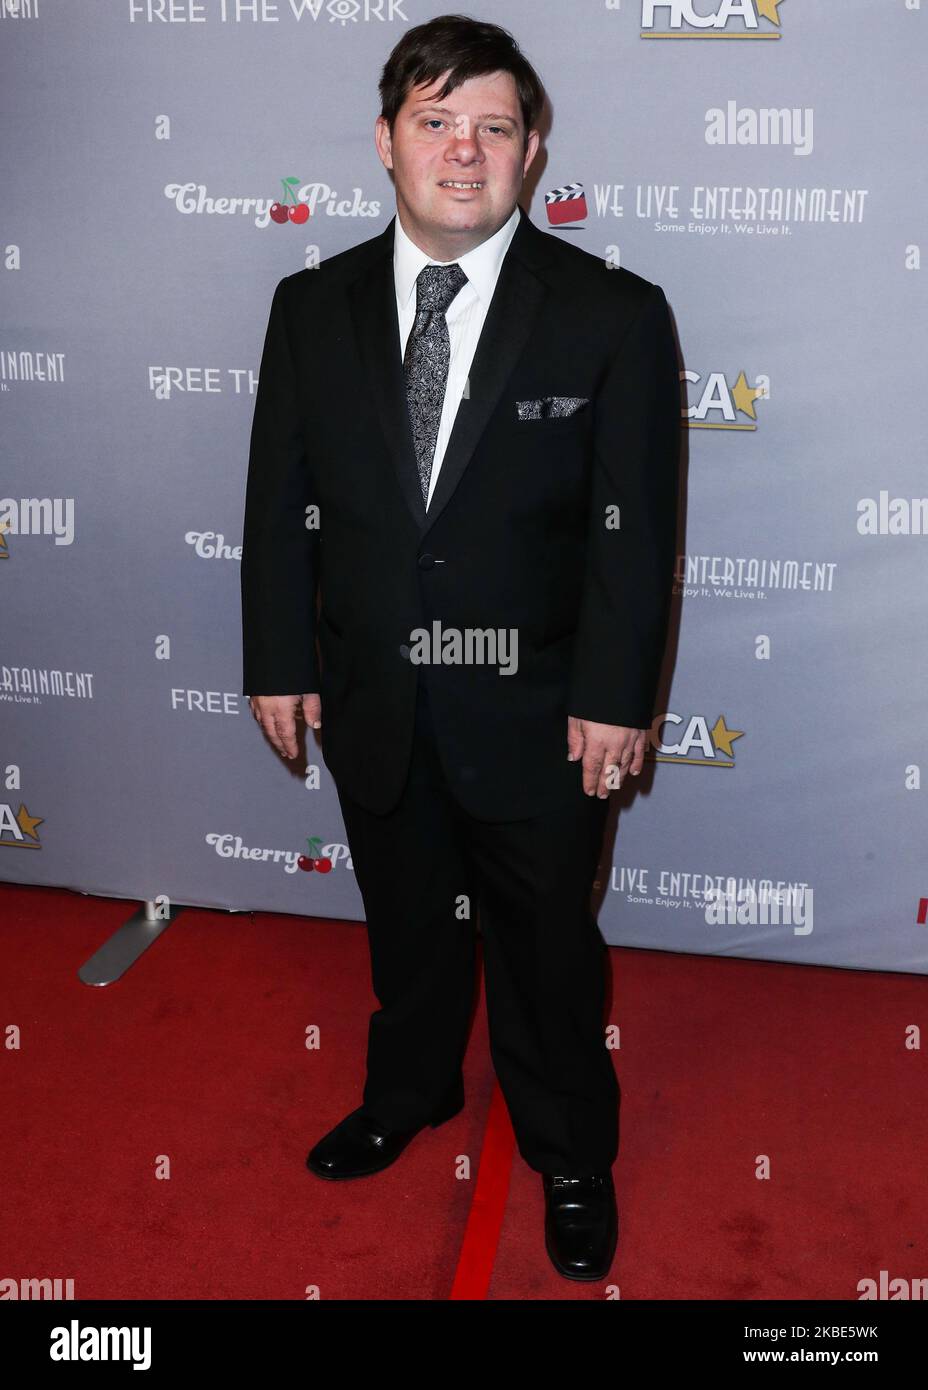 HOLLYWOOD, LOS ANGELES, CALIFORNIA, USA - JANUARY 09: Zack Gottsagen arrives at the 3rd Annual Hollywood Critics' Awards held at the Taglyan Cultural Complex on January 9, 2020 in Hollywood, Los Angeles, California, United States. (Photo by Xavier Collin/Image Press Agency/NurPhoto) Stock Photo